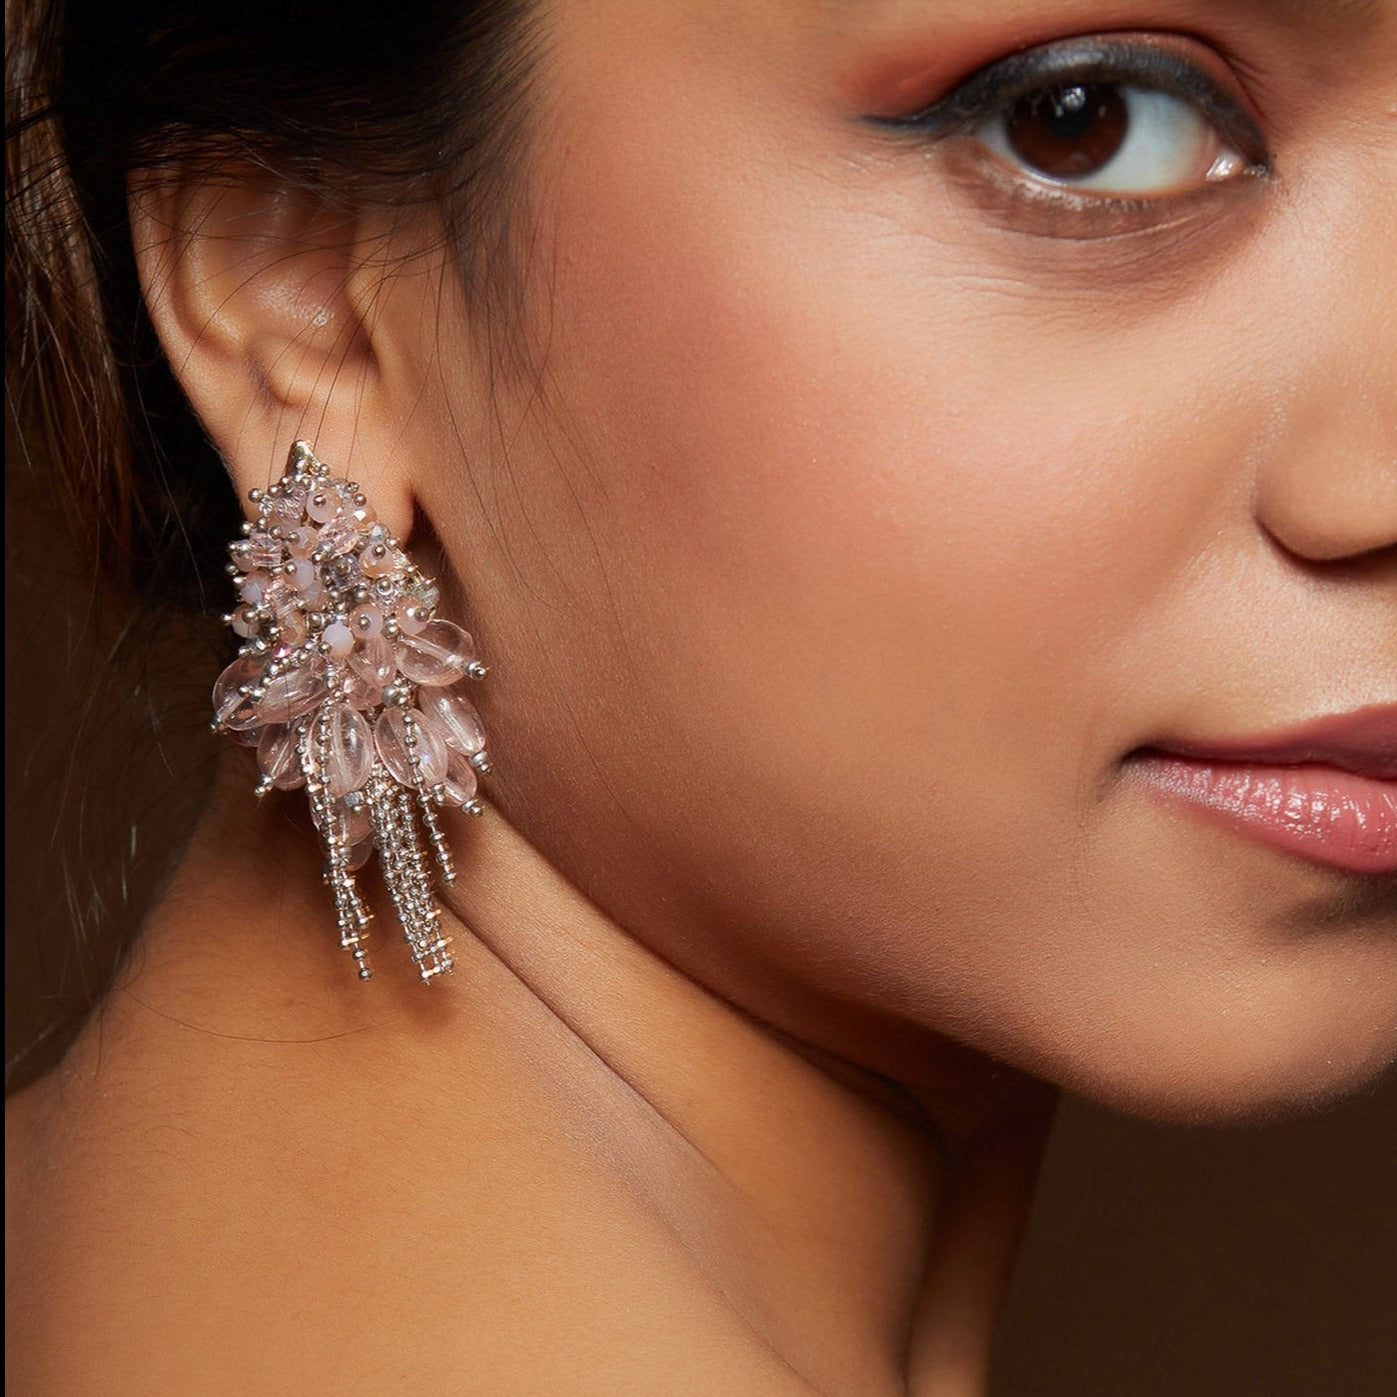 Free Photos - A Beautiful Indian Woman Wearing A Stunning Pink Dress,  Likely A Formal Or Bridal Attire. She Is Adorned With Jewelry, Including  Necklaces And Earrings, Further Enhancing The Elegance Of